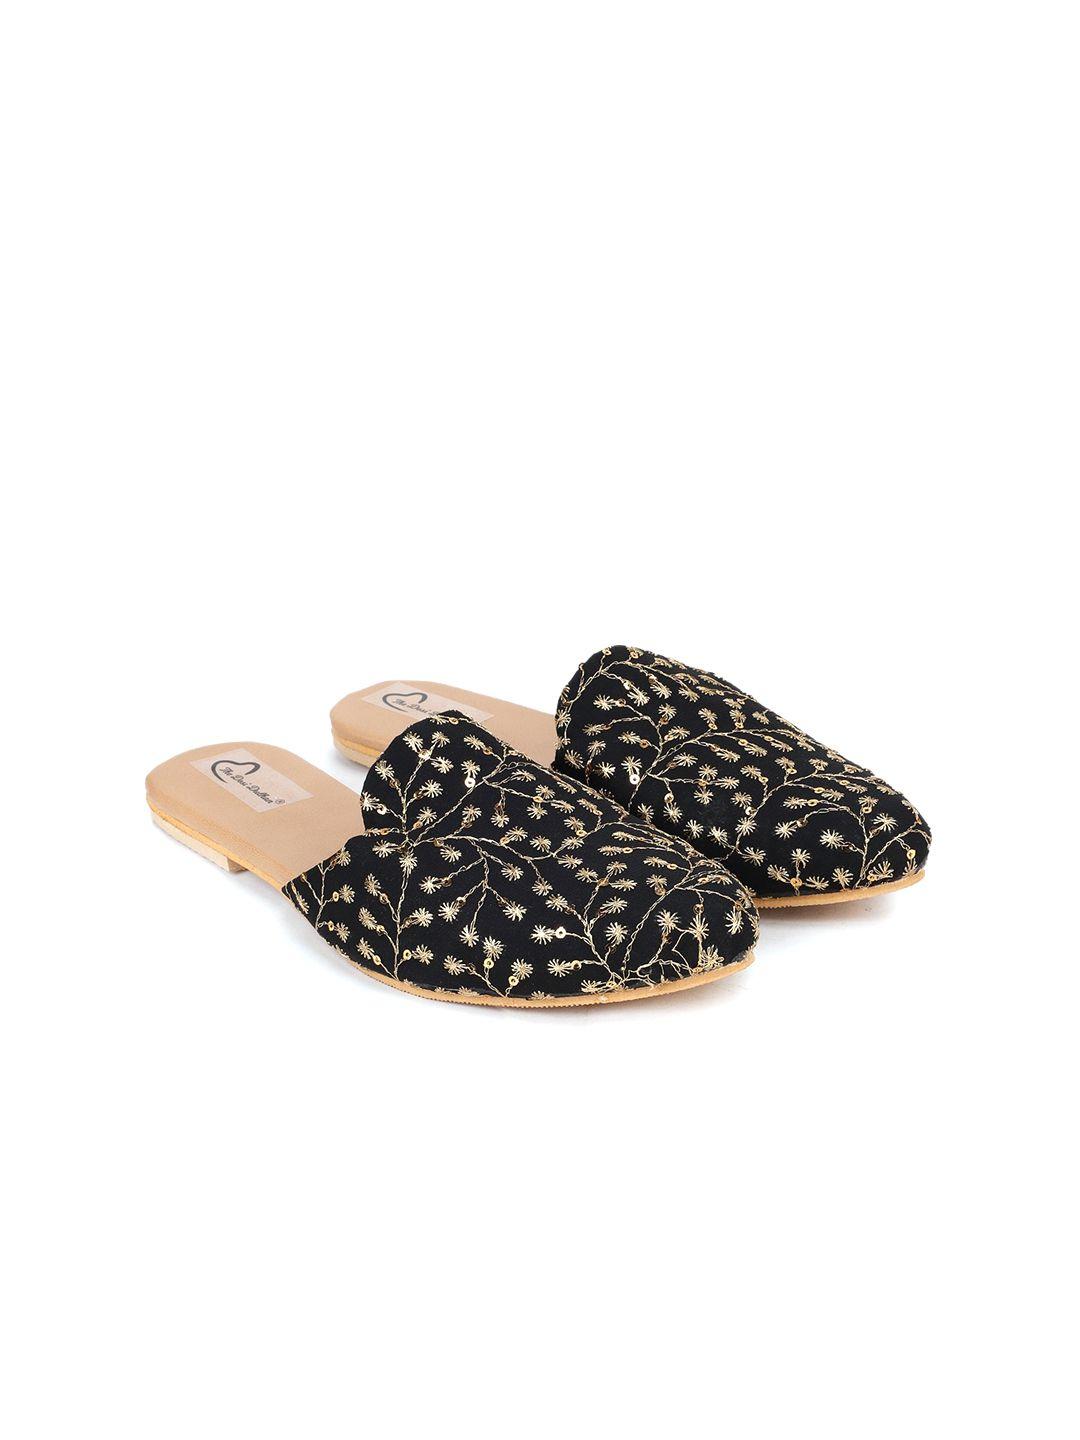 The Desi Dulhan Women Black Embroidered Ethnic Mules Flats